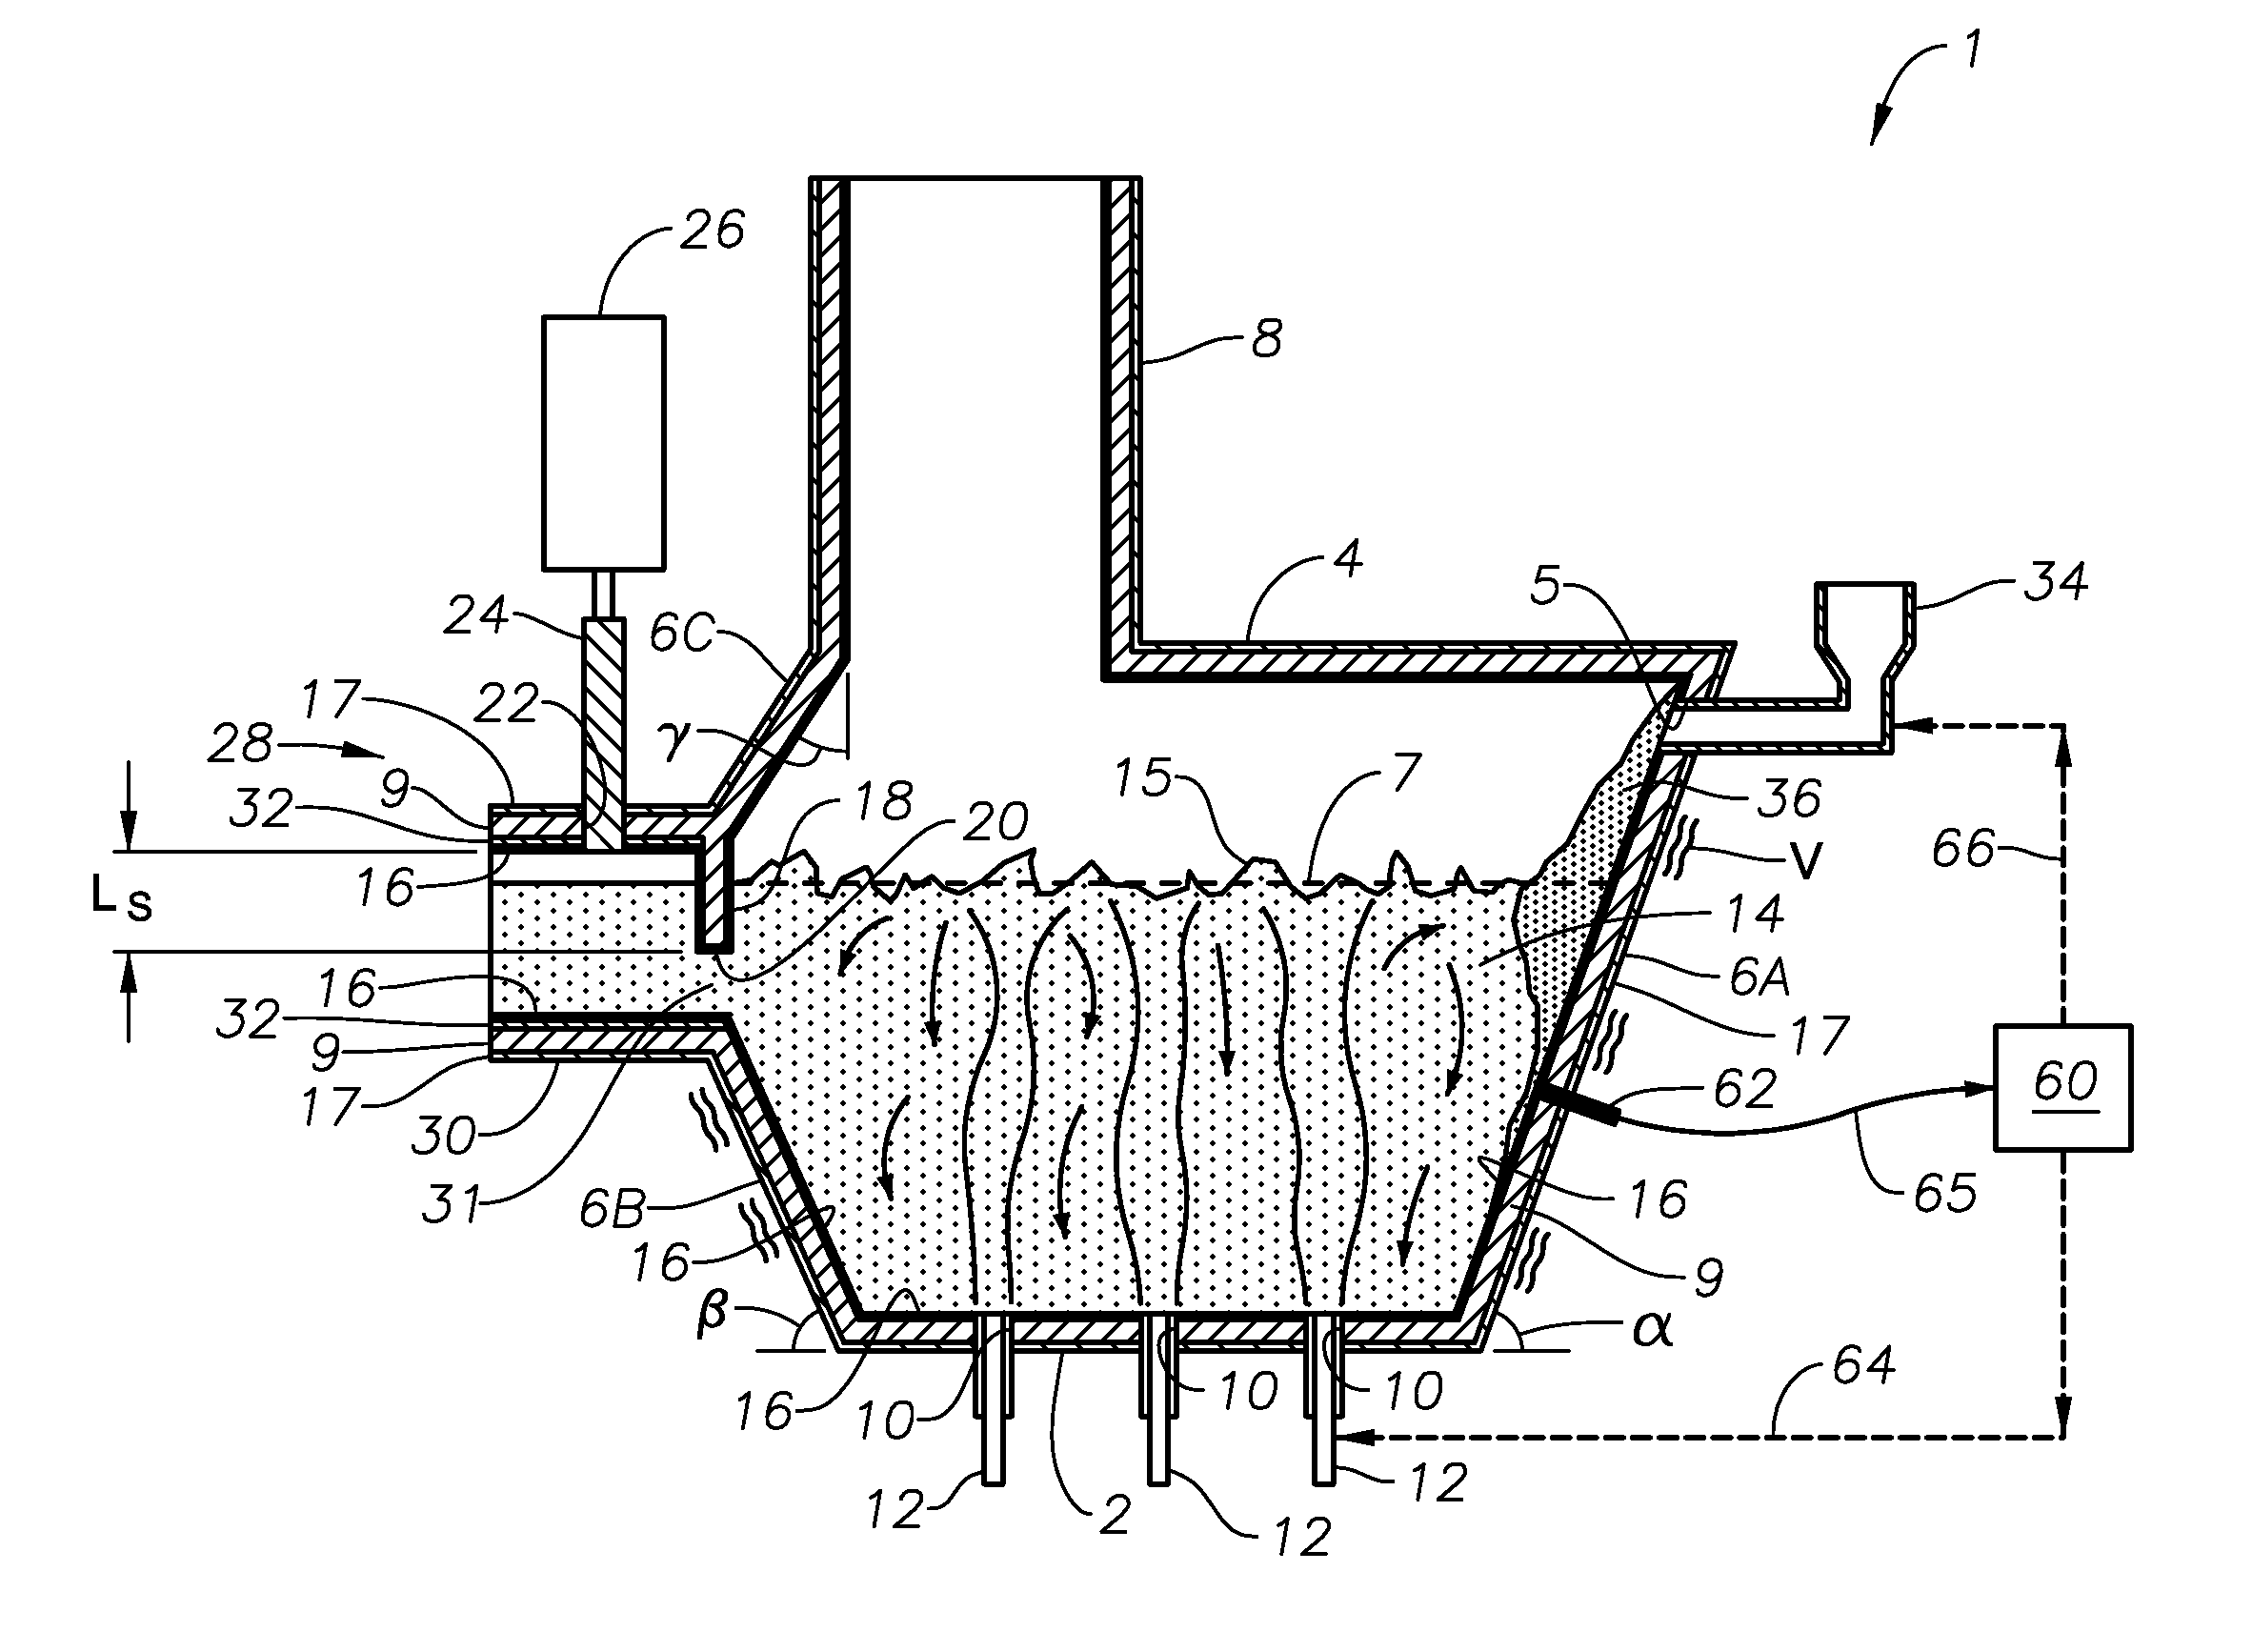 Submerged combustion melting processes for producing glass and similar materials, and systems for carrying out such processes